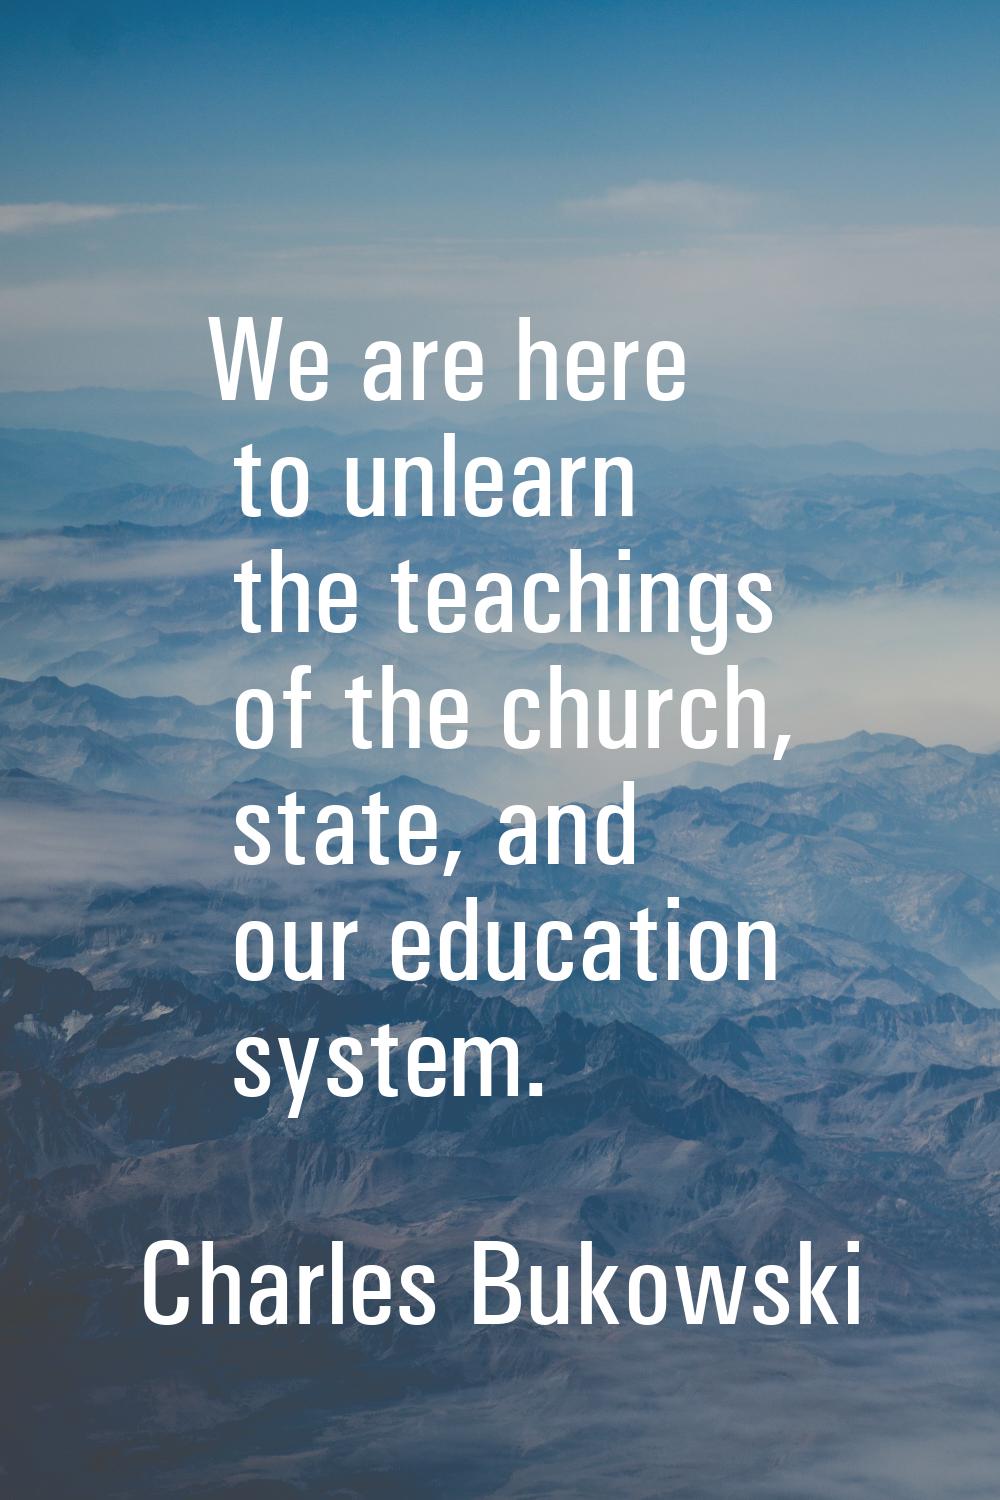 We are here to unlearn the teachings of the church, state, and our education system.